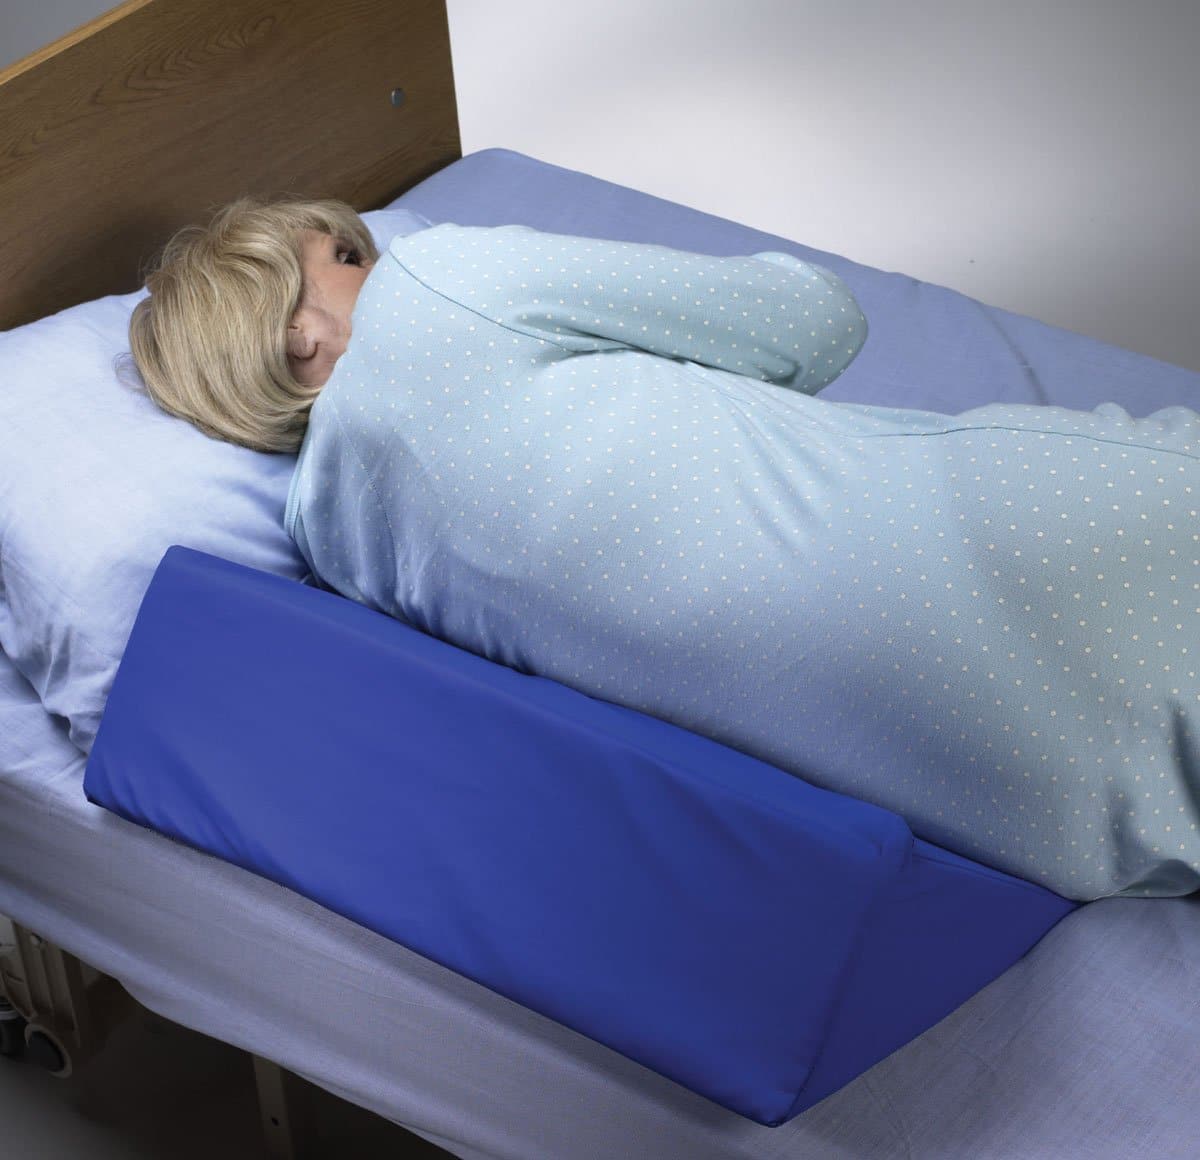 Bed Wedge Pillow Position Wedge Side Sleeping Cushion for Elderly